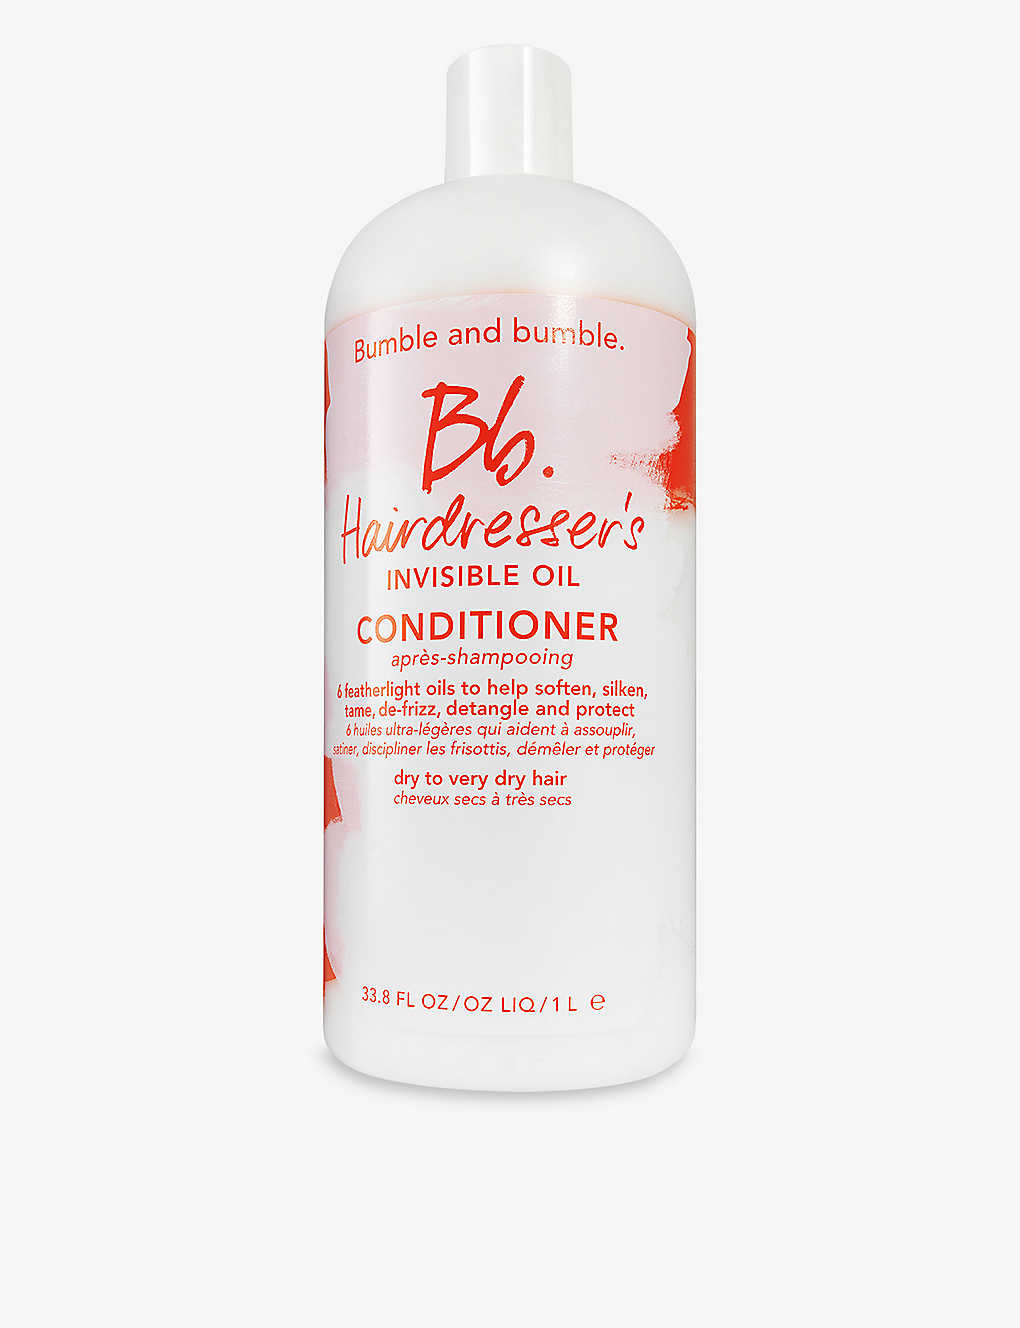 Bumble And Bumble Hairdressers Conditioner